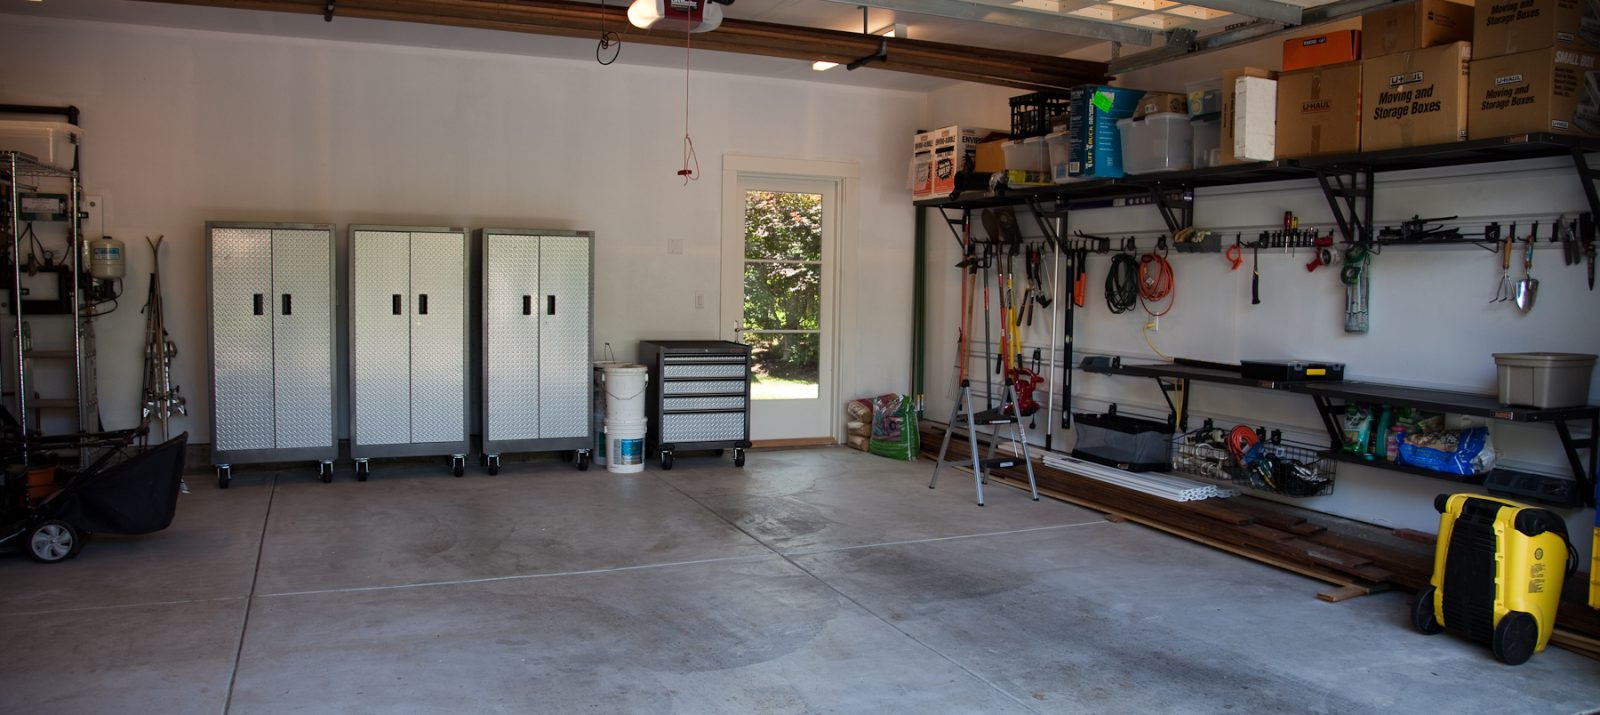 Organized Garage Images
 How To Easily Clean And Organize Your Garage [Infographic]